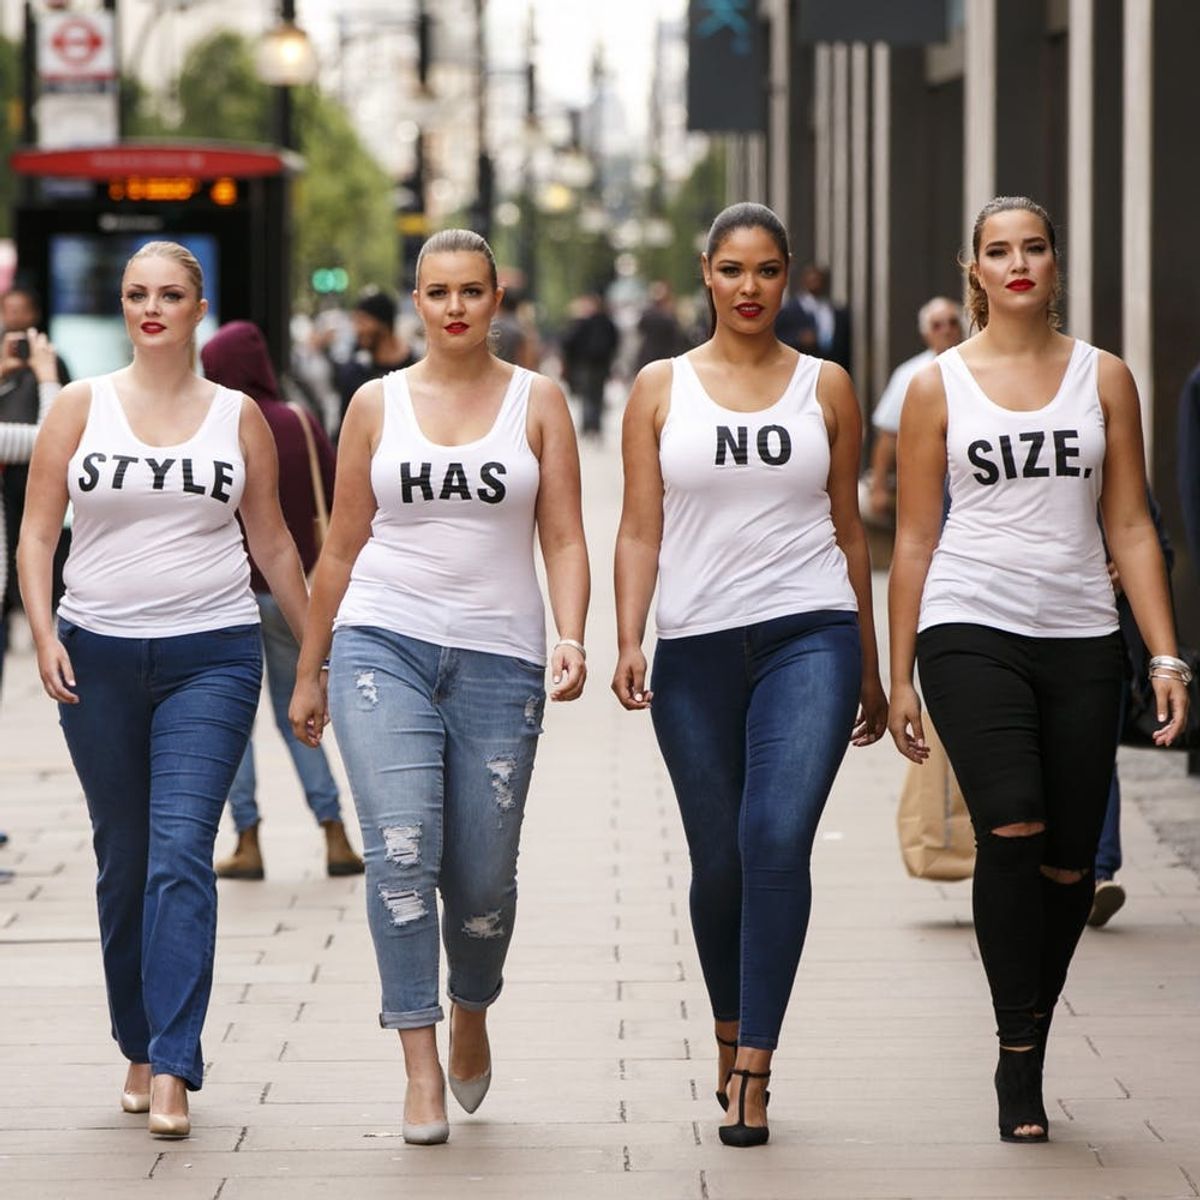 Curvy Models Boost Body Confidence in Women, Says Study